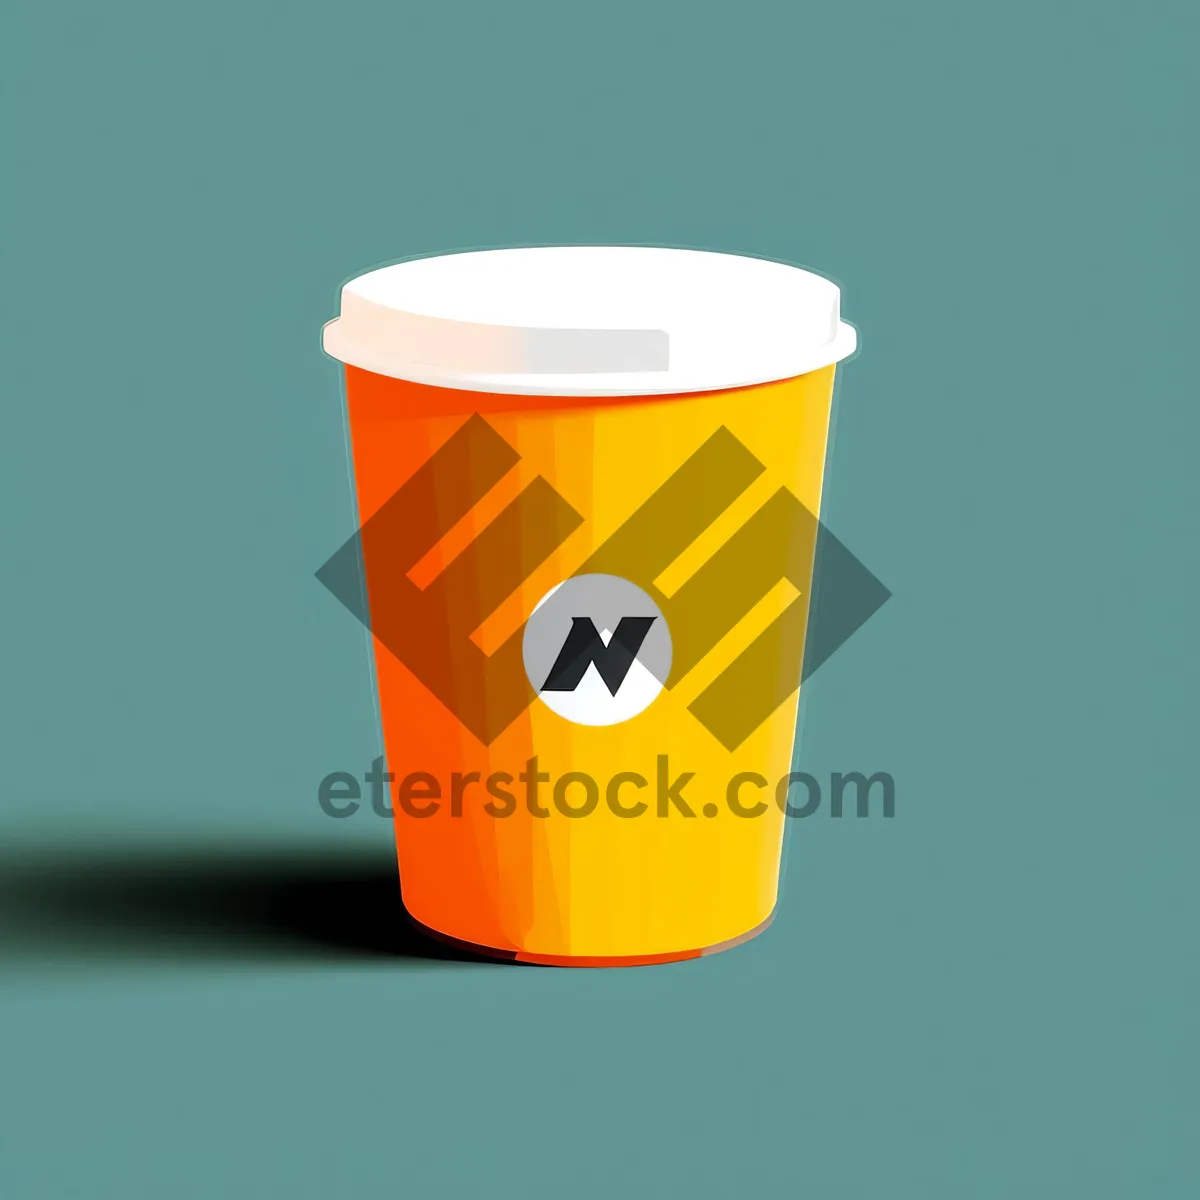 Picture of Yellow Coffee Mug on Table